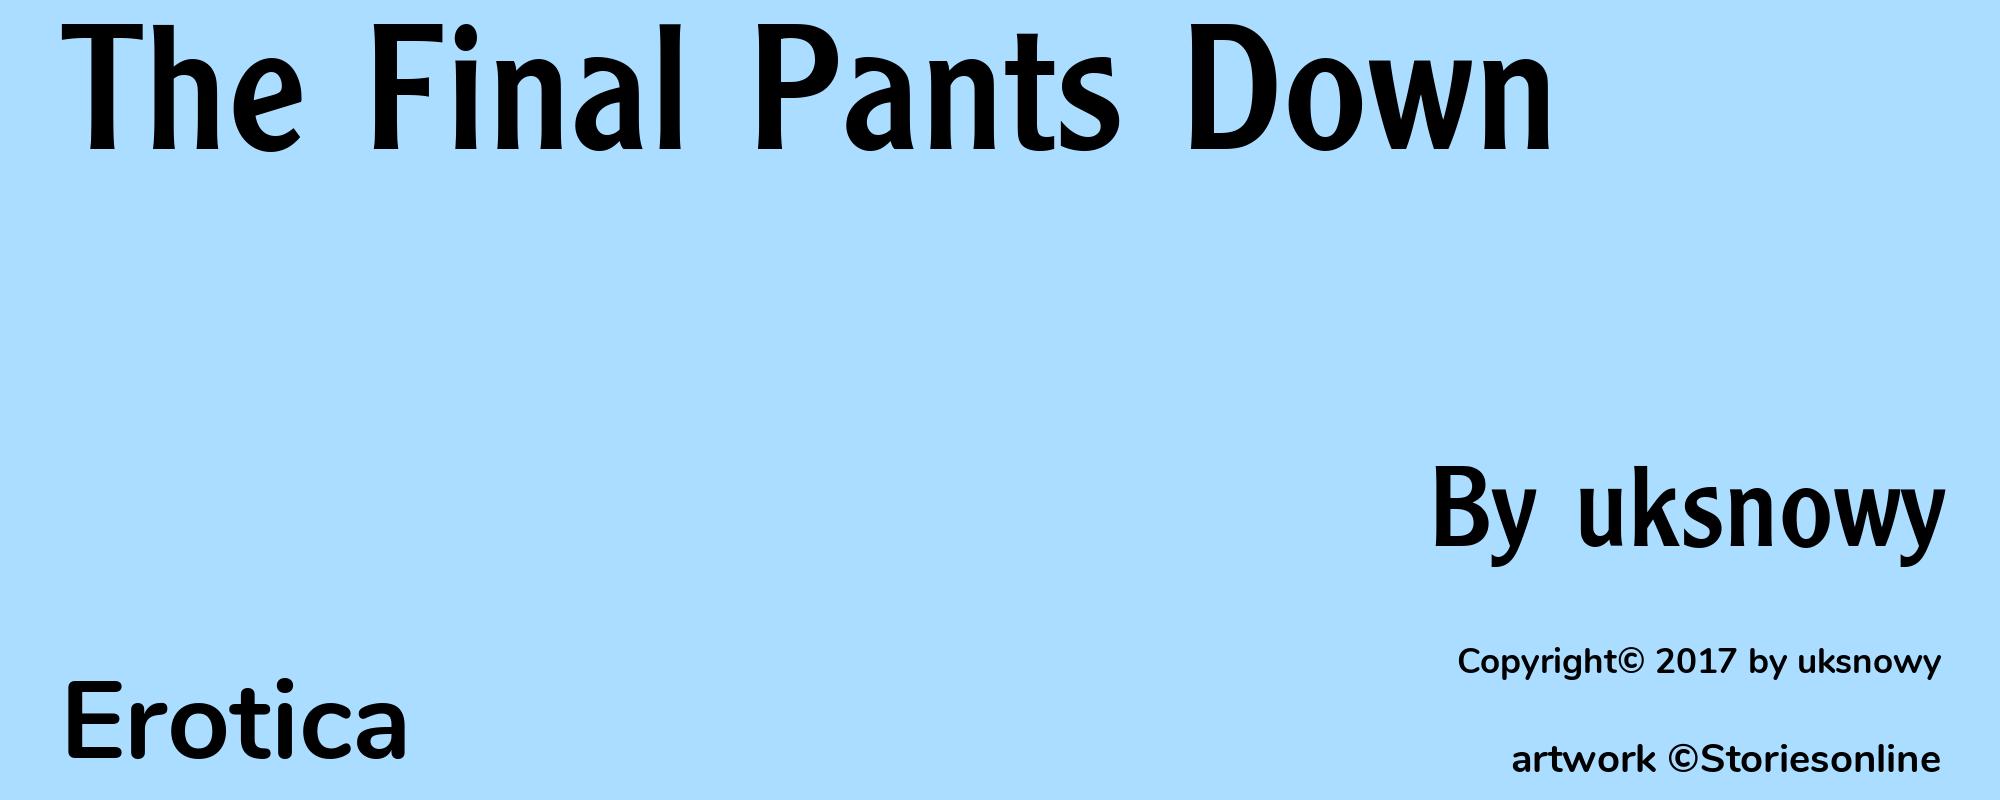 The Final Pants Down - Cover